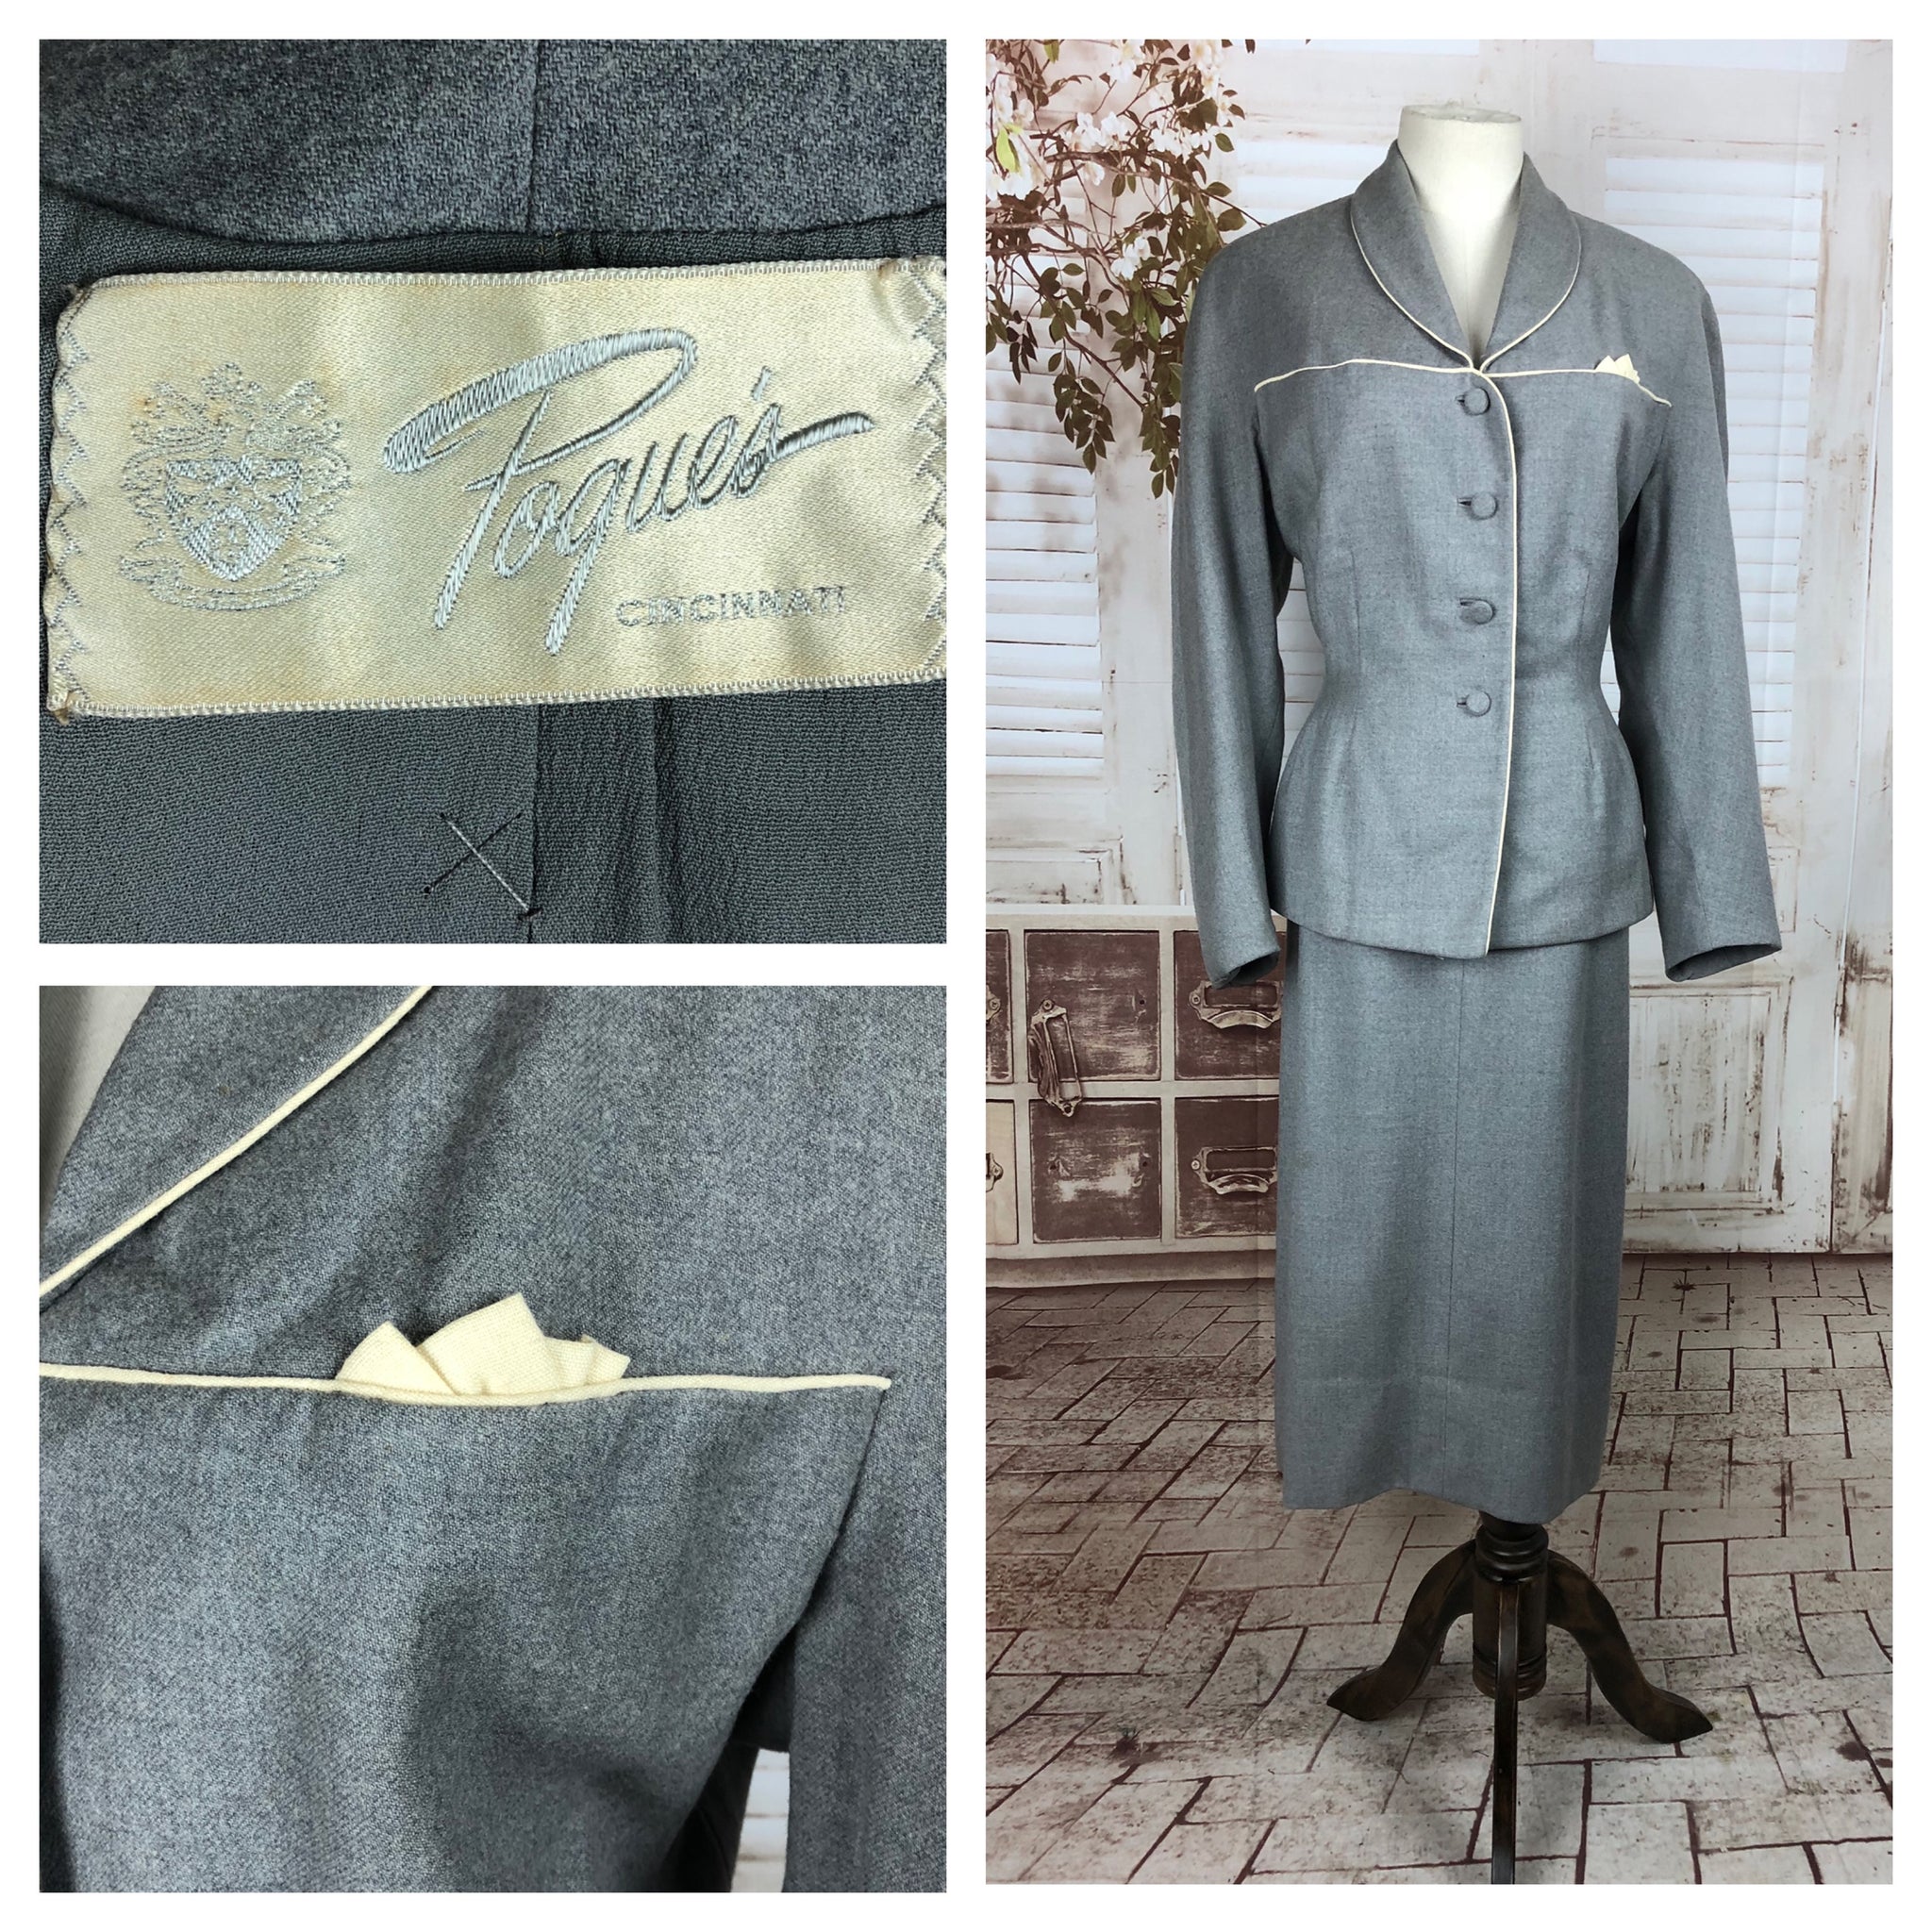 Original 1950s 50s Vintage Grey Wool Suit With White Highlights By Walda Scott